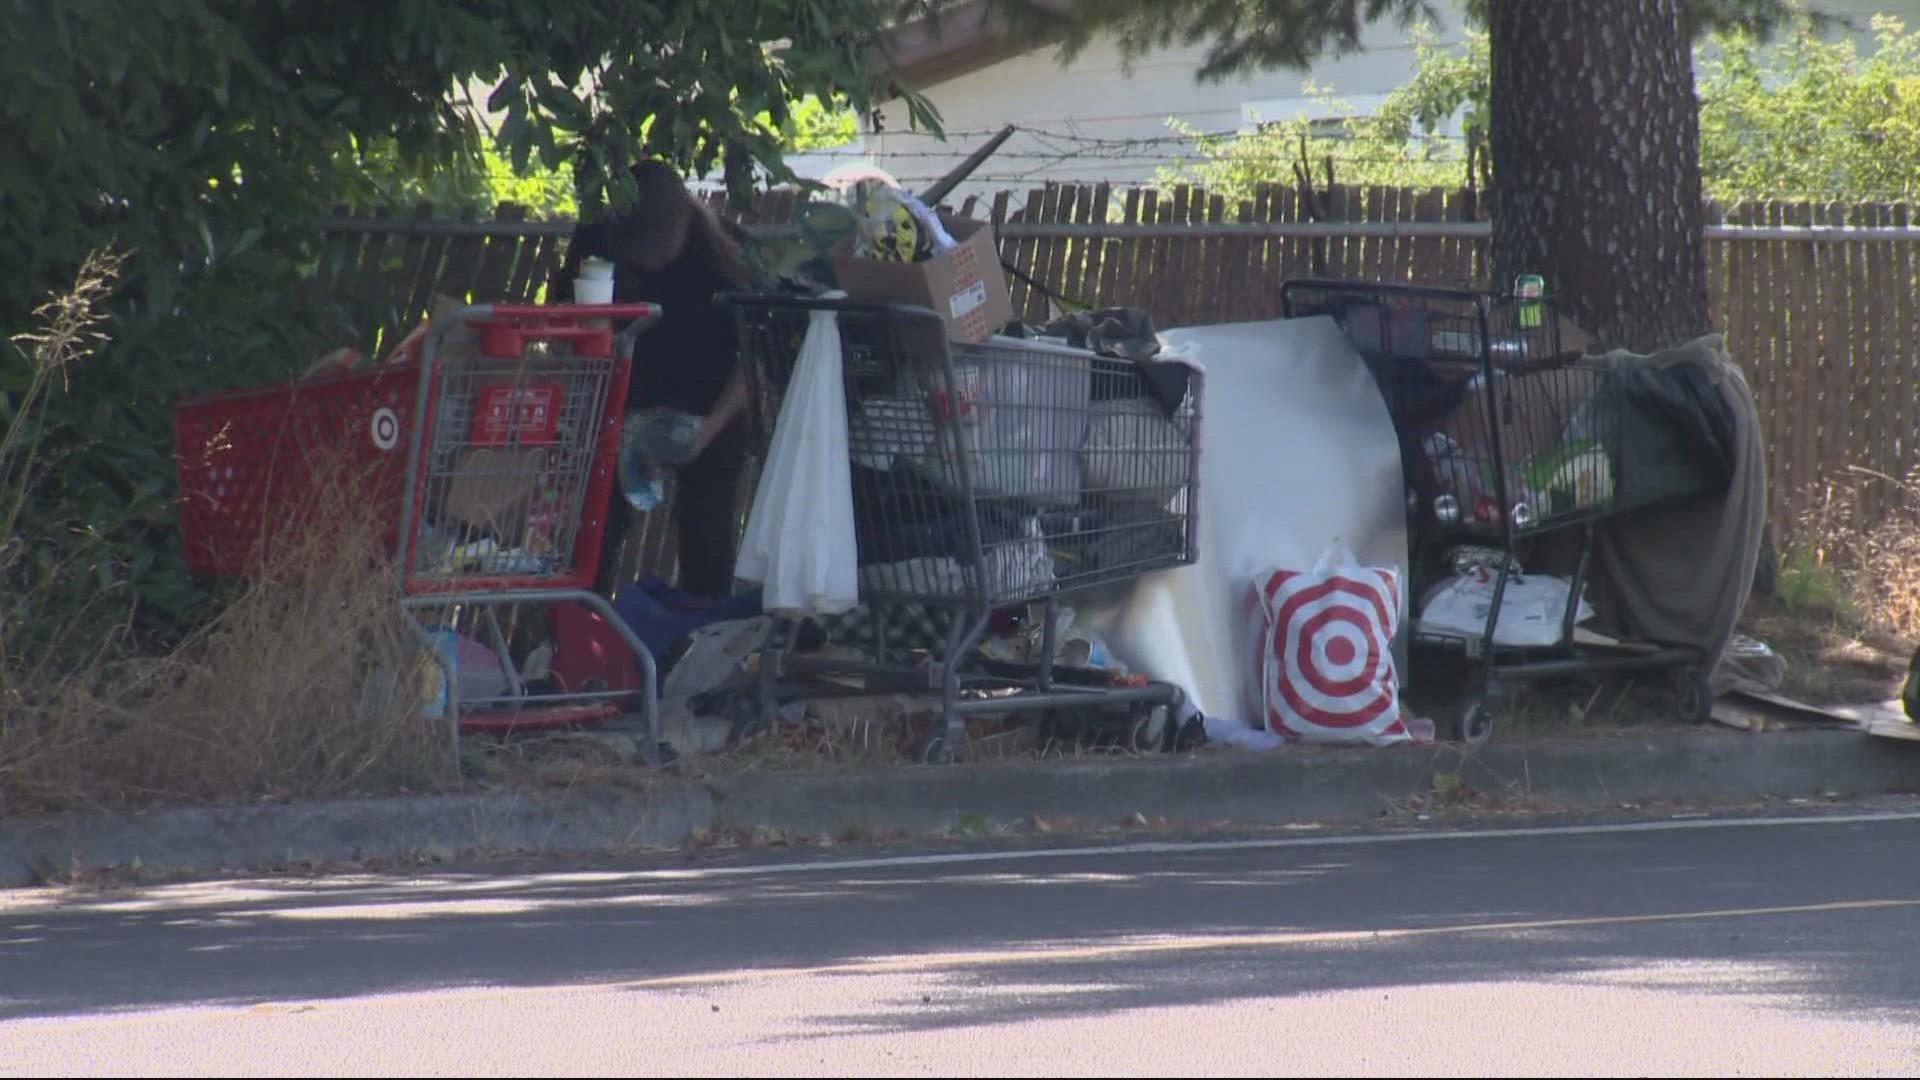 A large abandoned field near the heart of Hillsboro will soon be a refuge for homeless people. Right now there are no available shelter beds in the city.